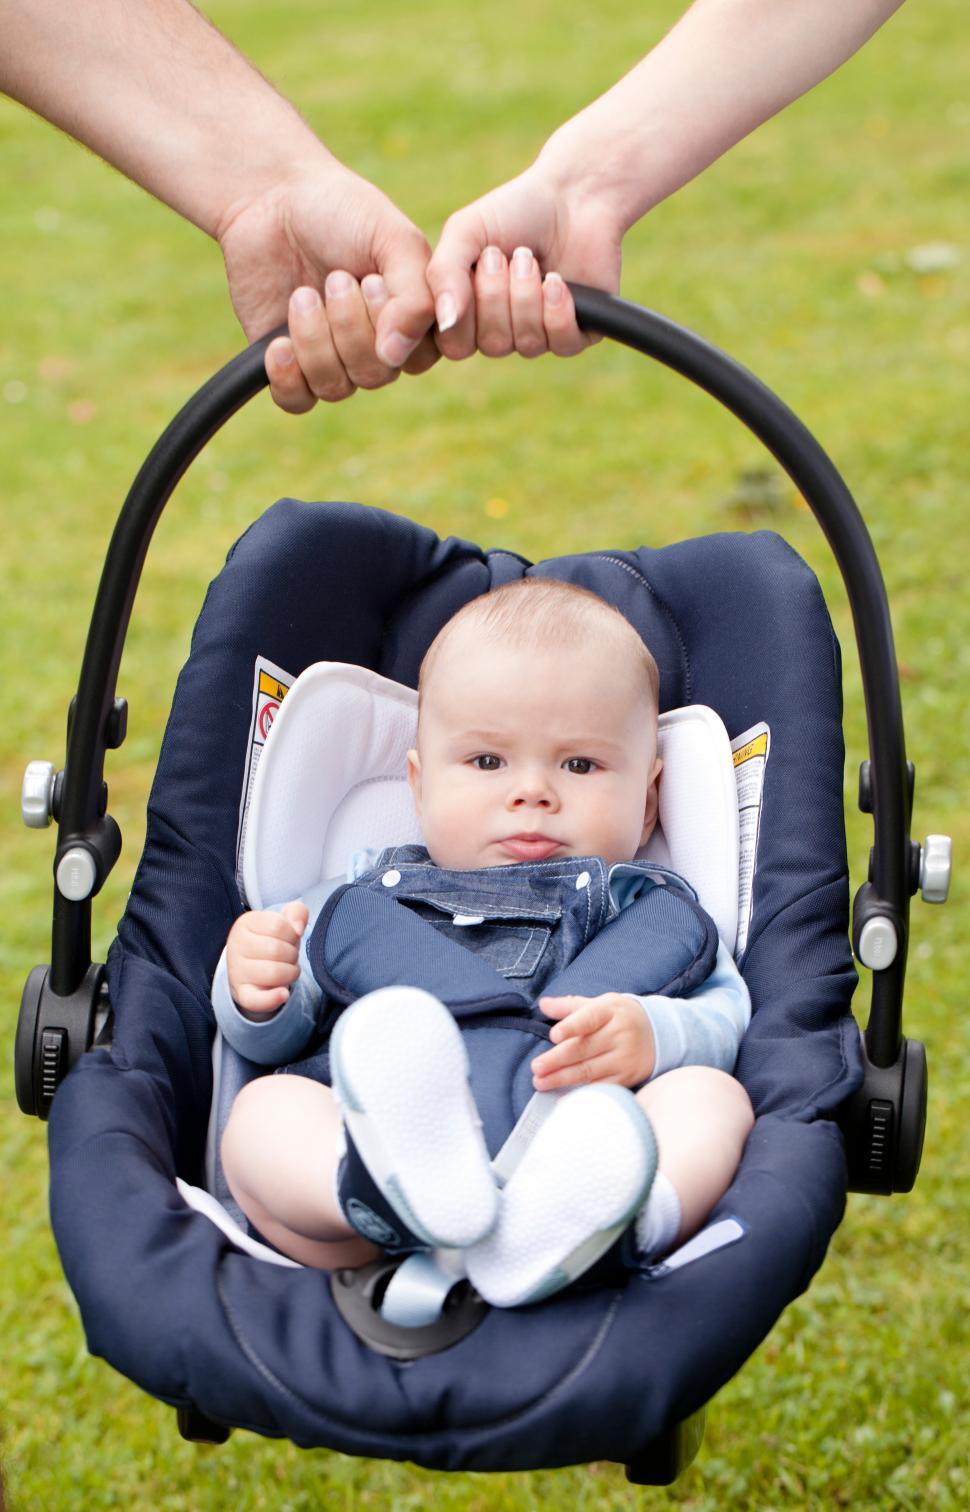 Free Image of Infant in a child card safety seat 